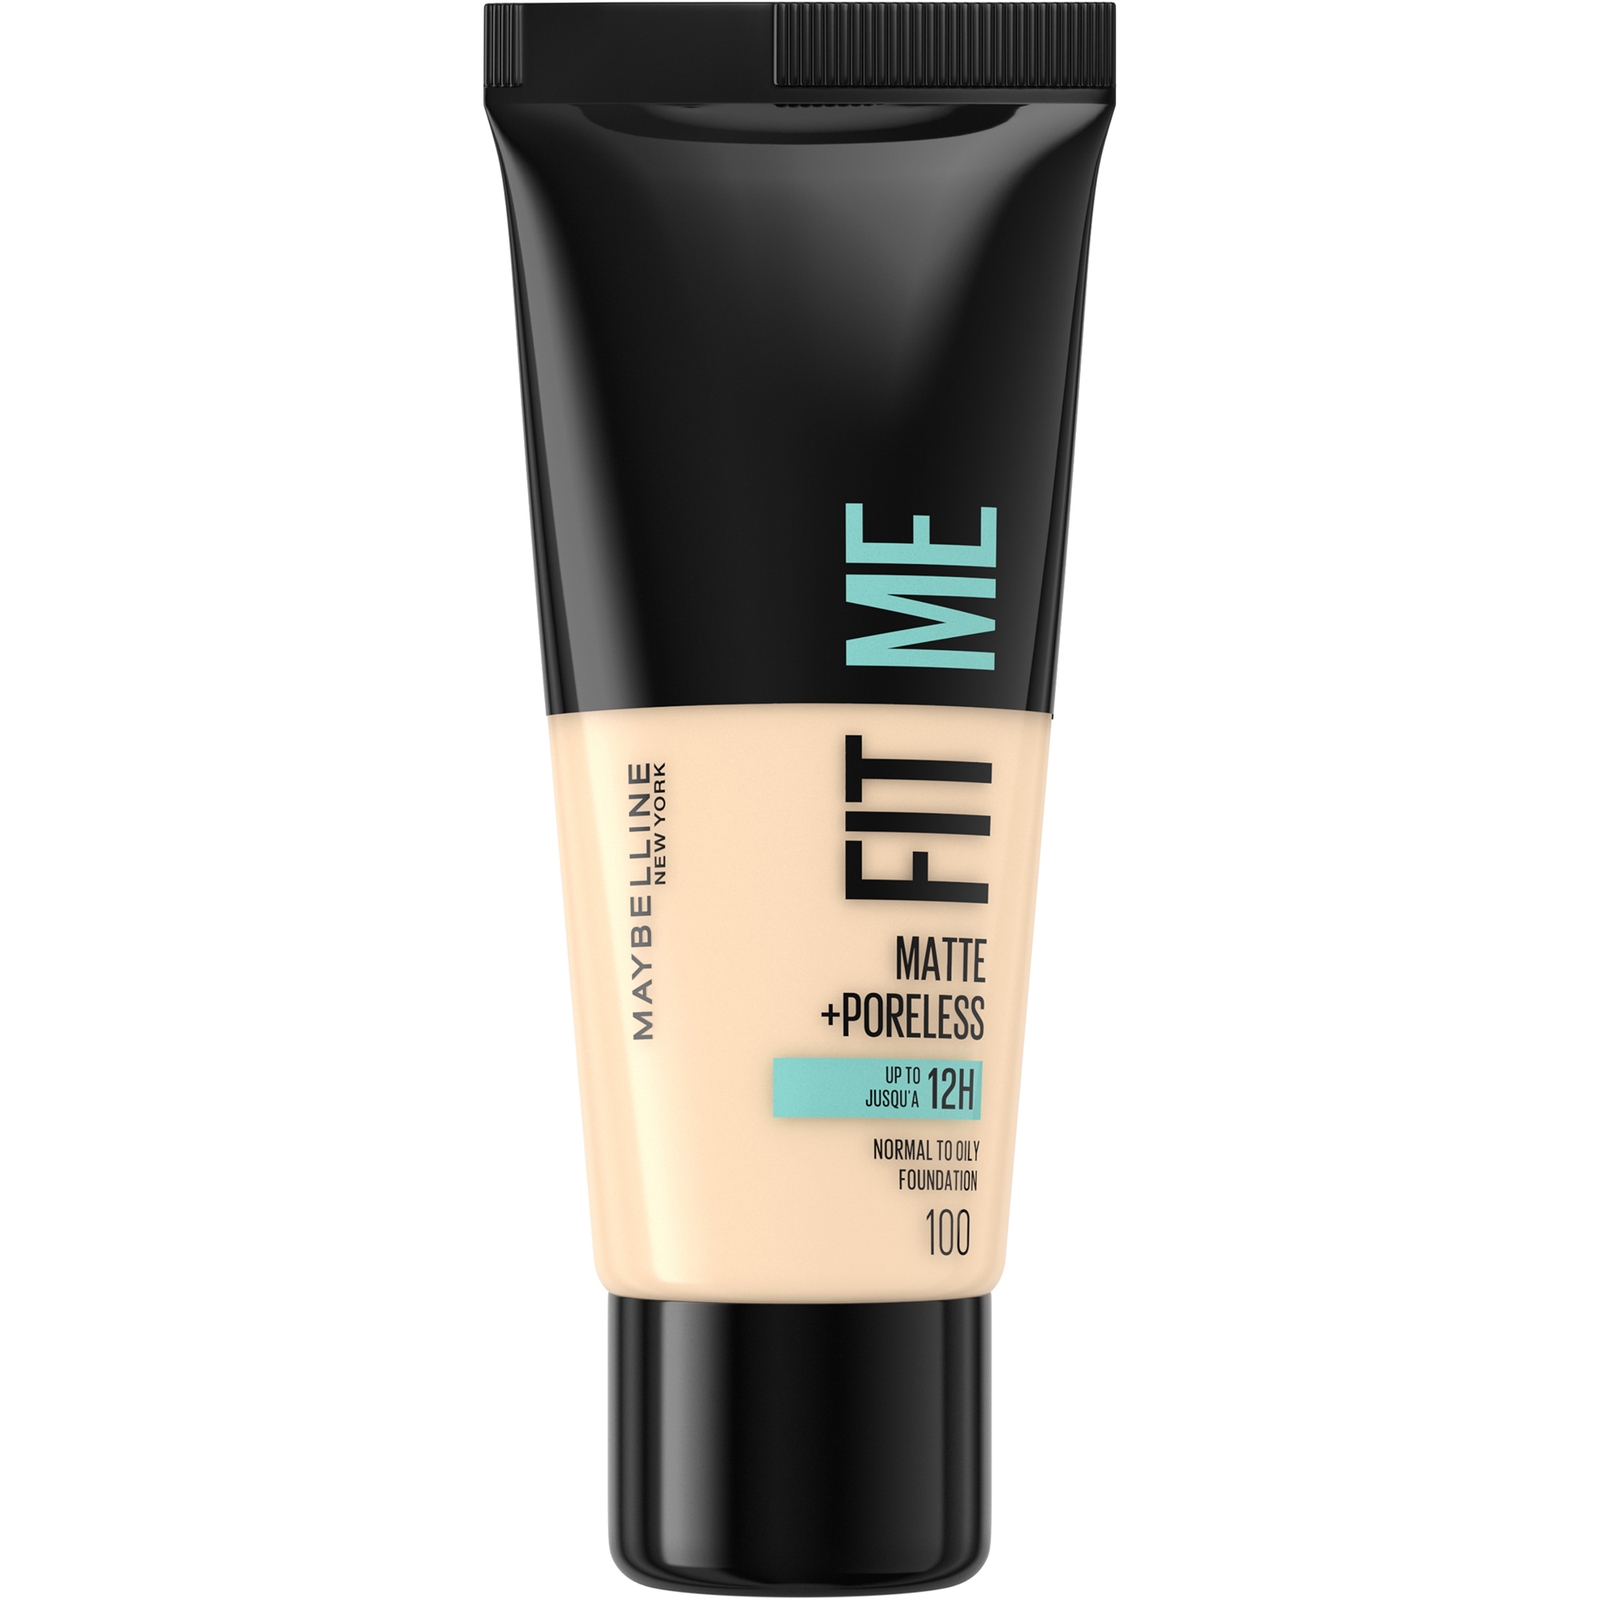 Maybelline Fit Me! Matte and Poreless Foundation 30ml (Various Shades) - 100 Warm Ivory